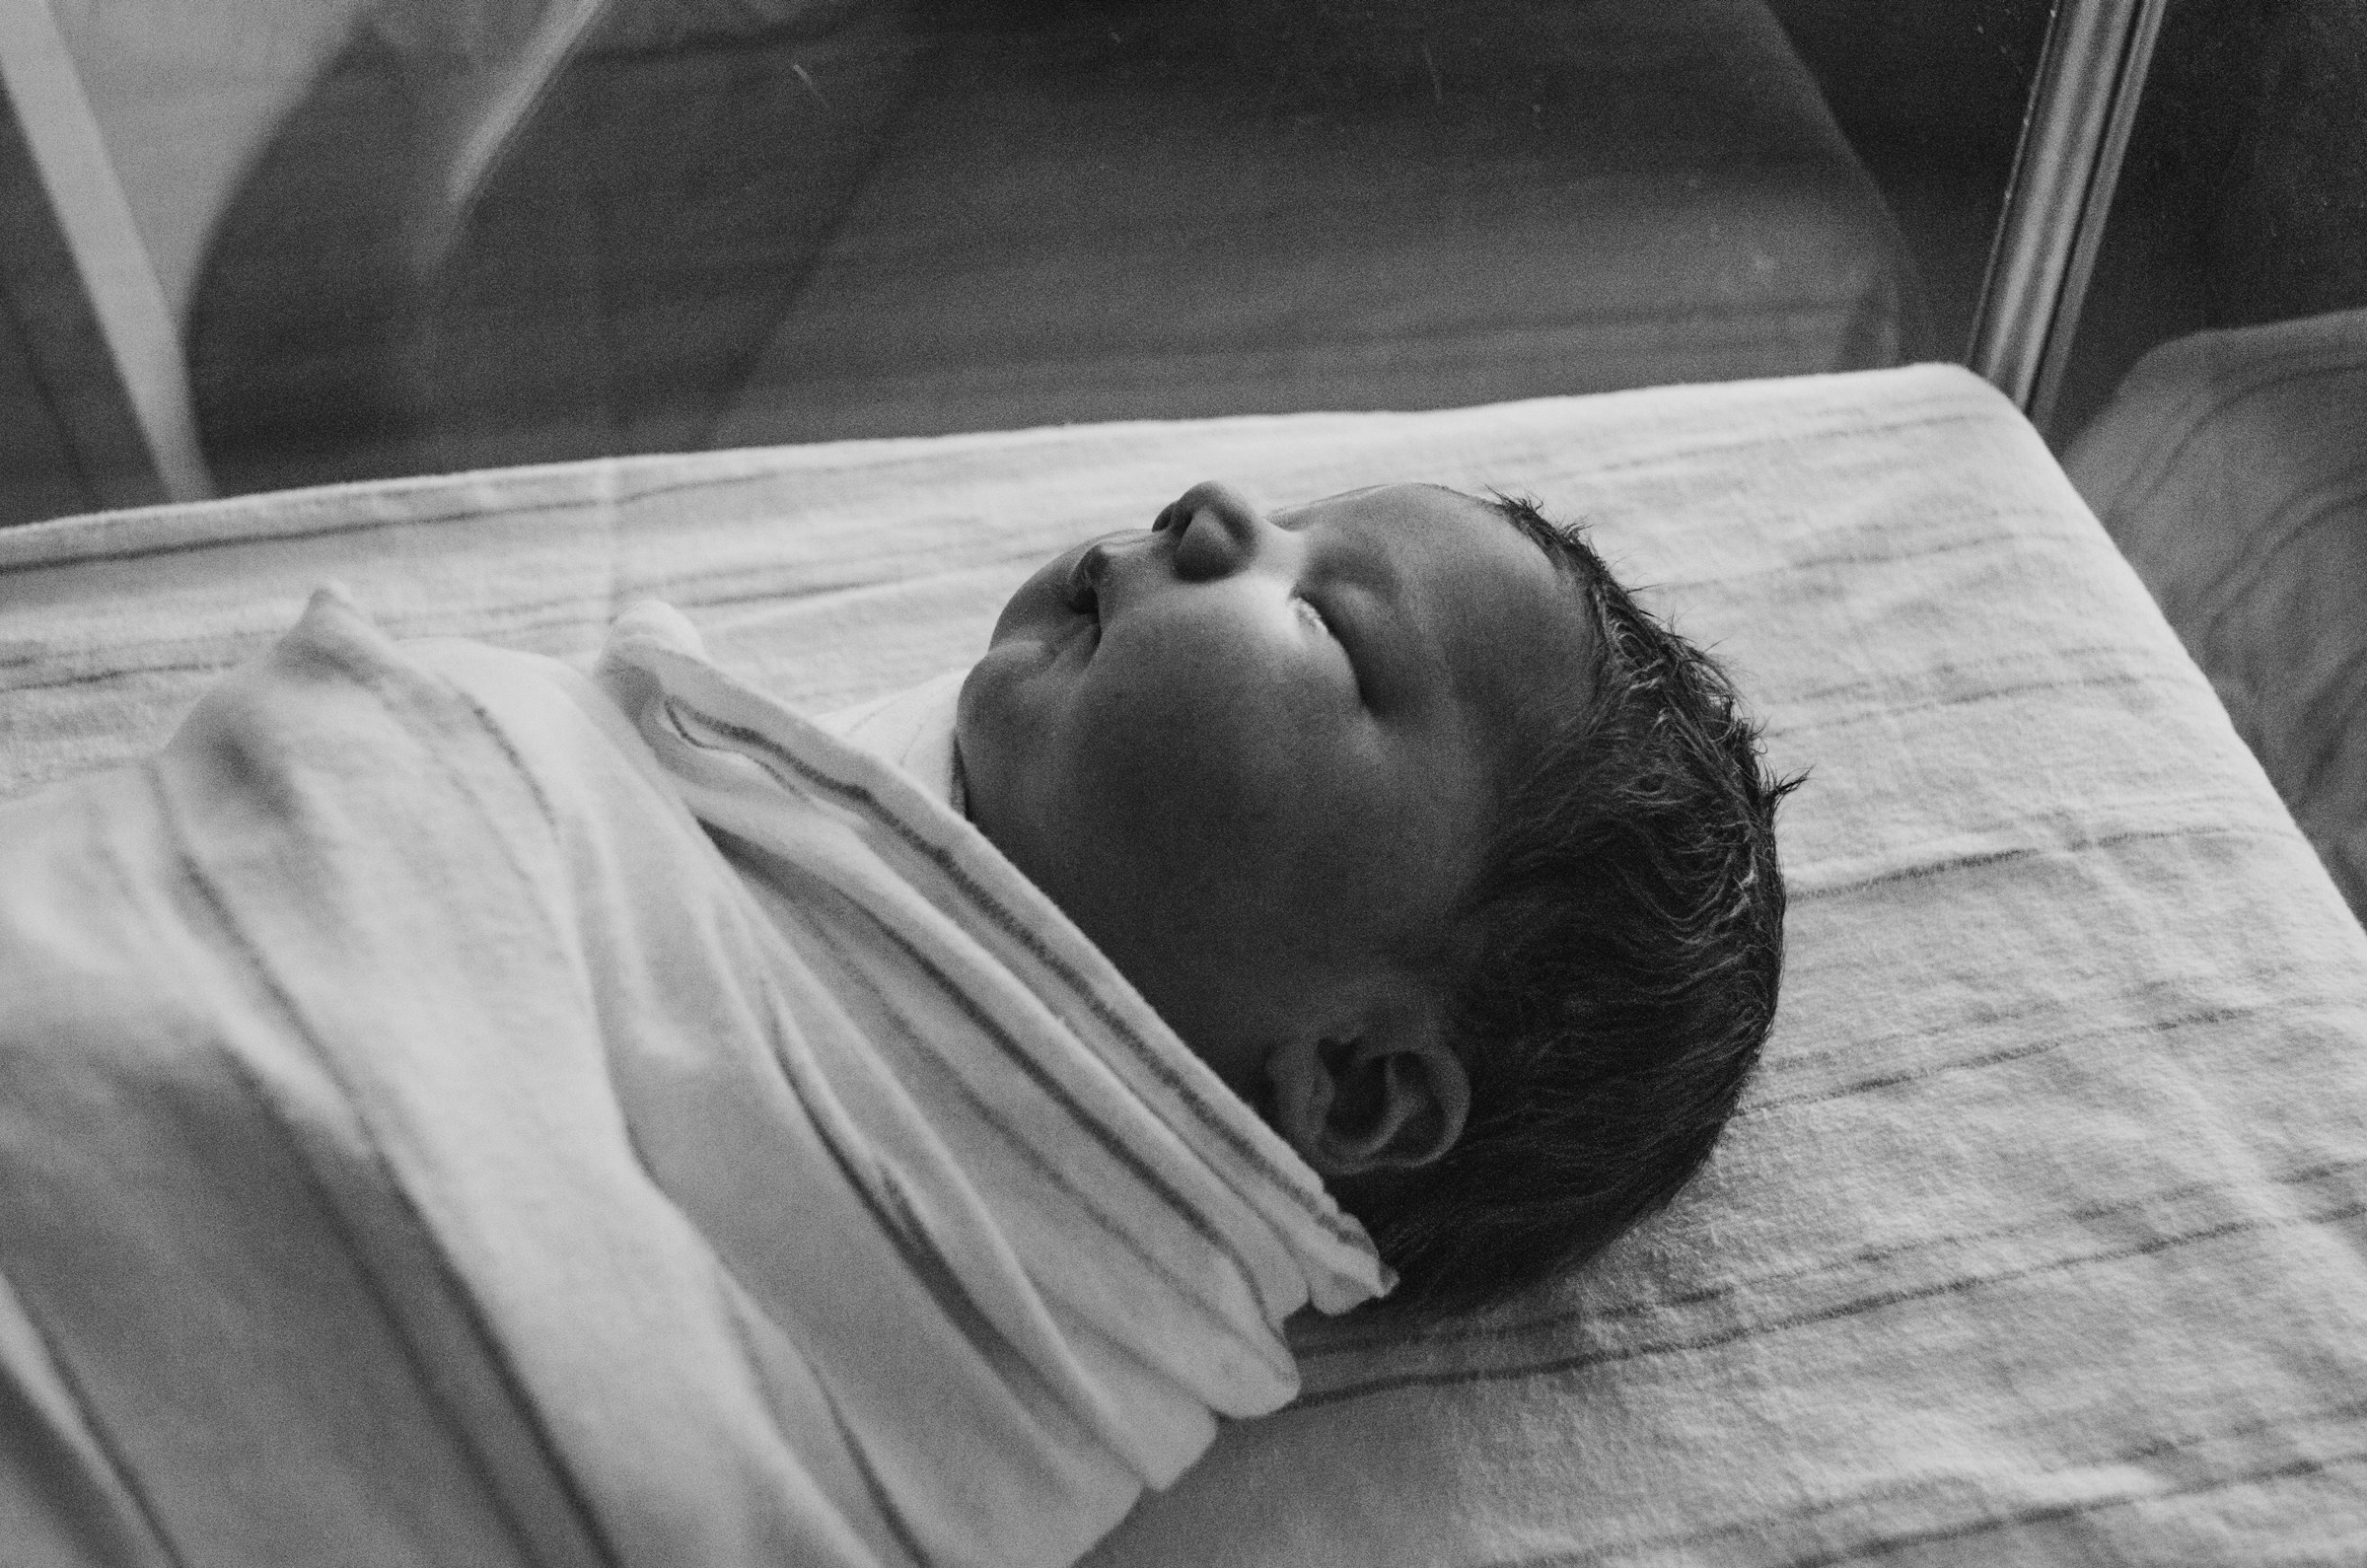 A grayscale photo of a newborn baby wrapped in a cloth | Source: Unsplash